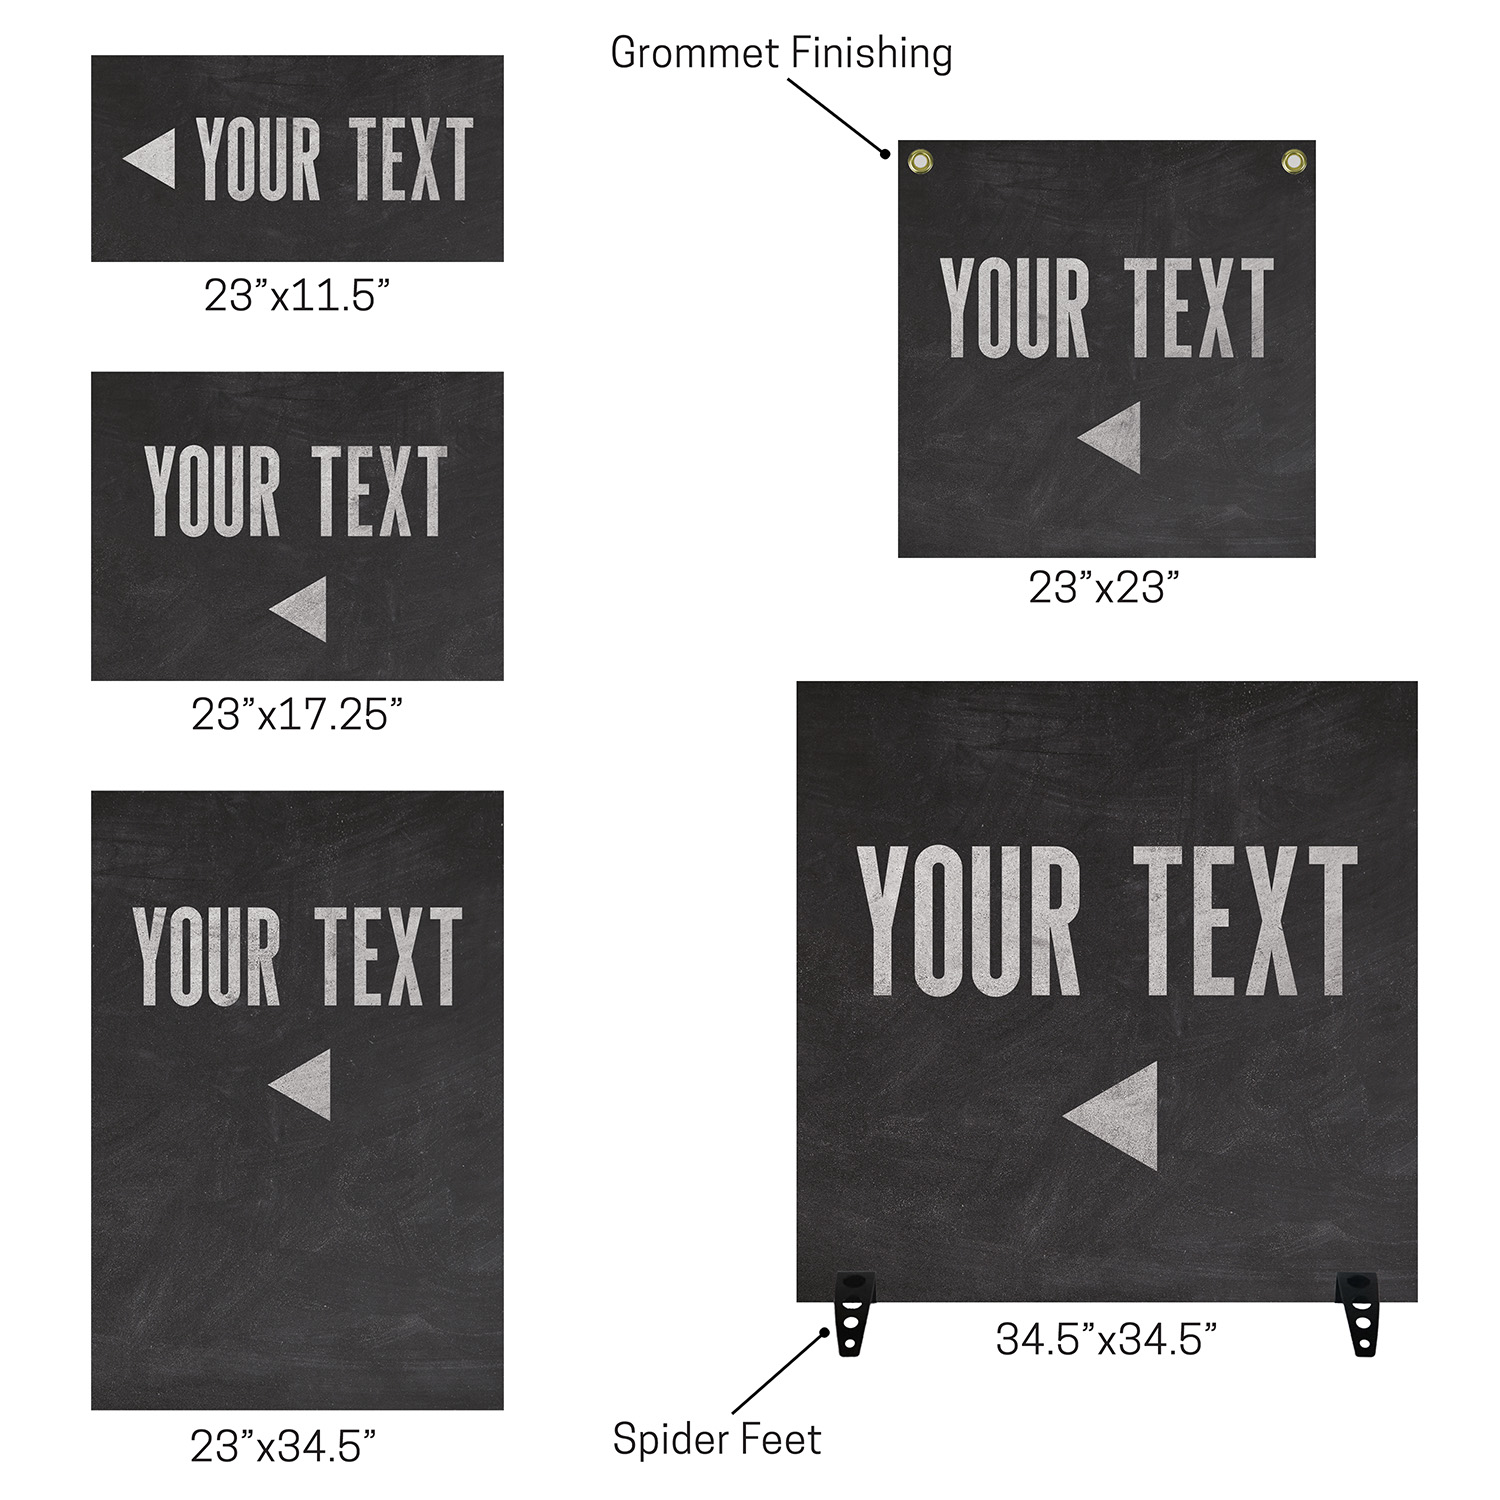 Rigid Signs, Colorful Lights Products, Colorful Lights Your Text, 23 x 11.5 2